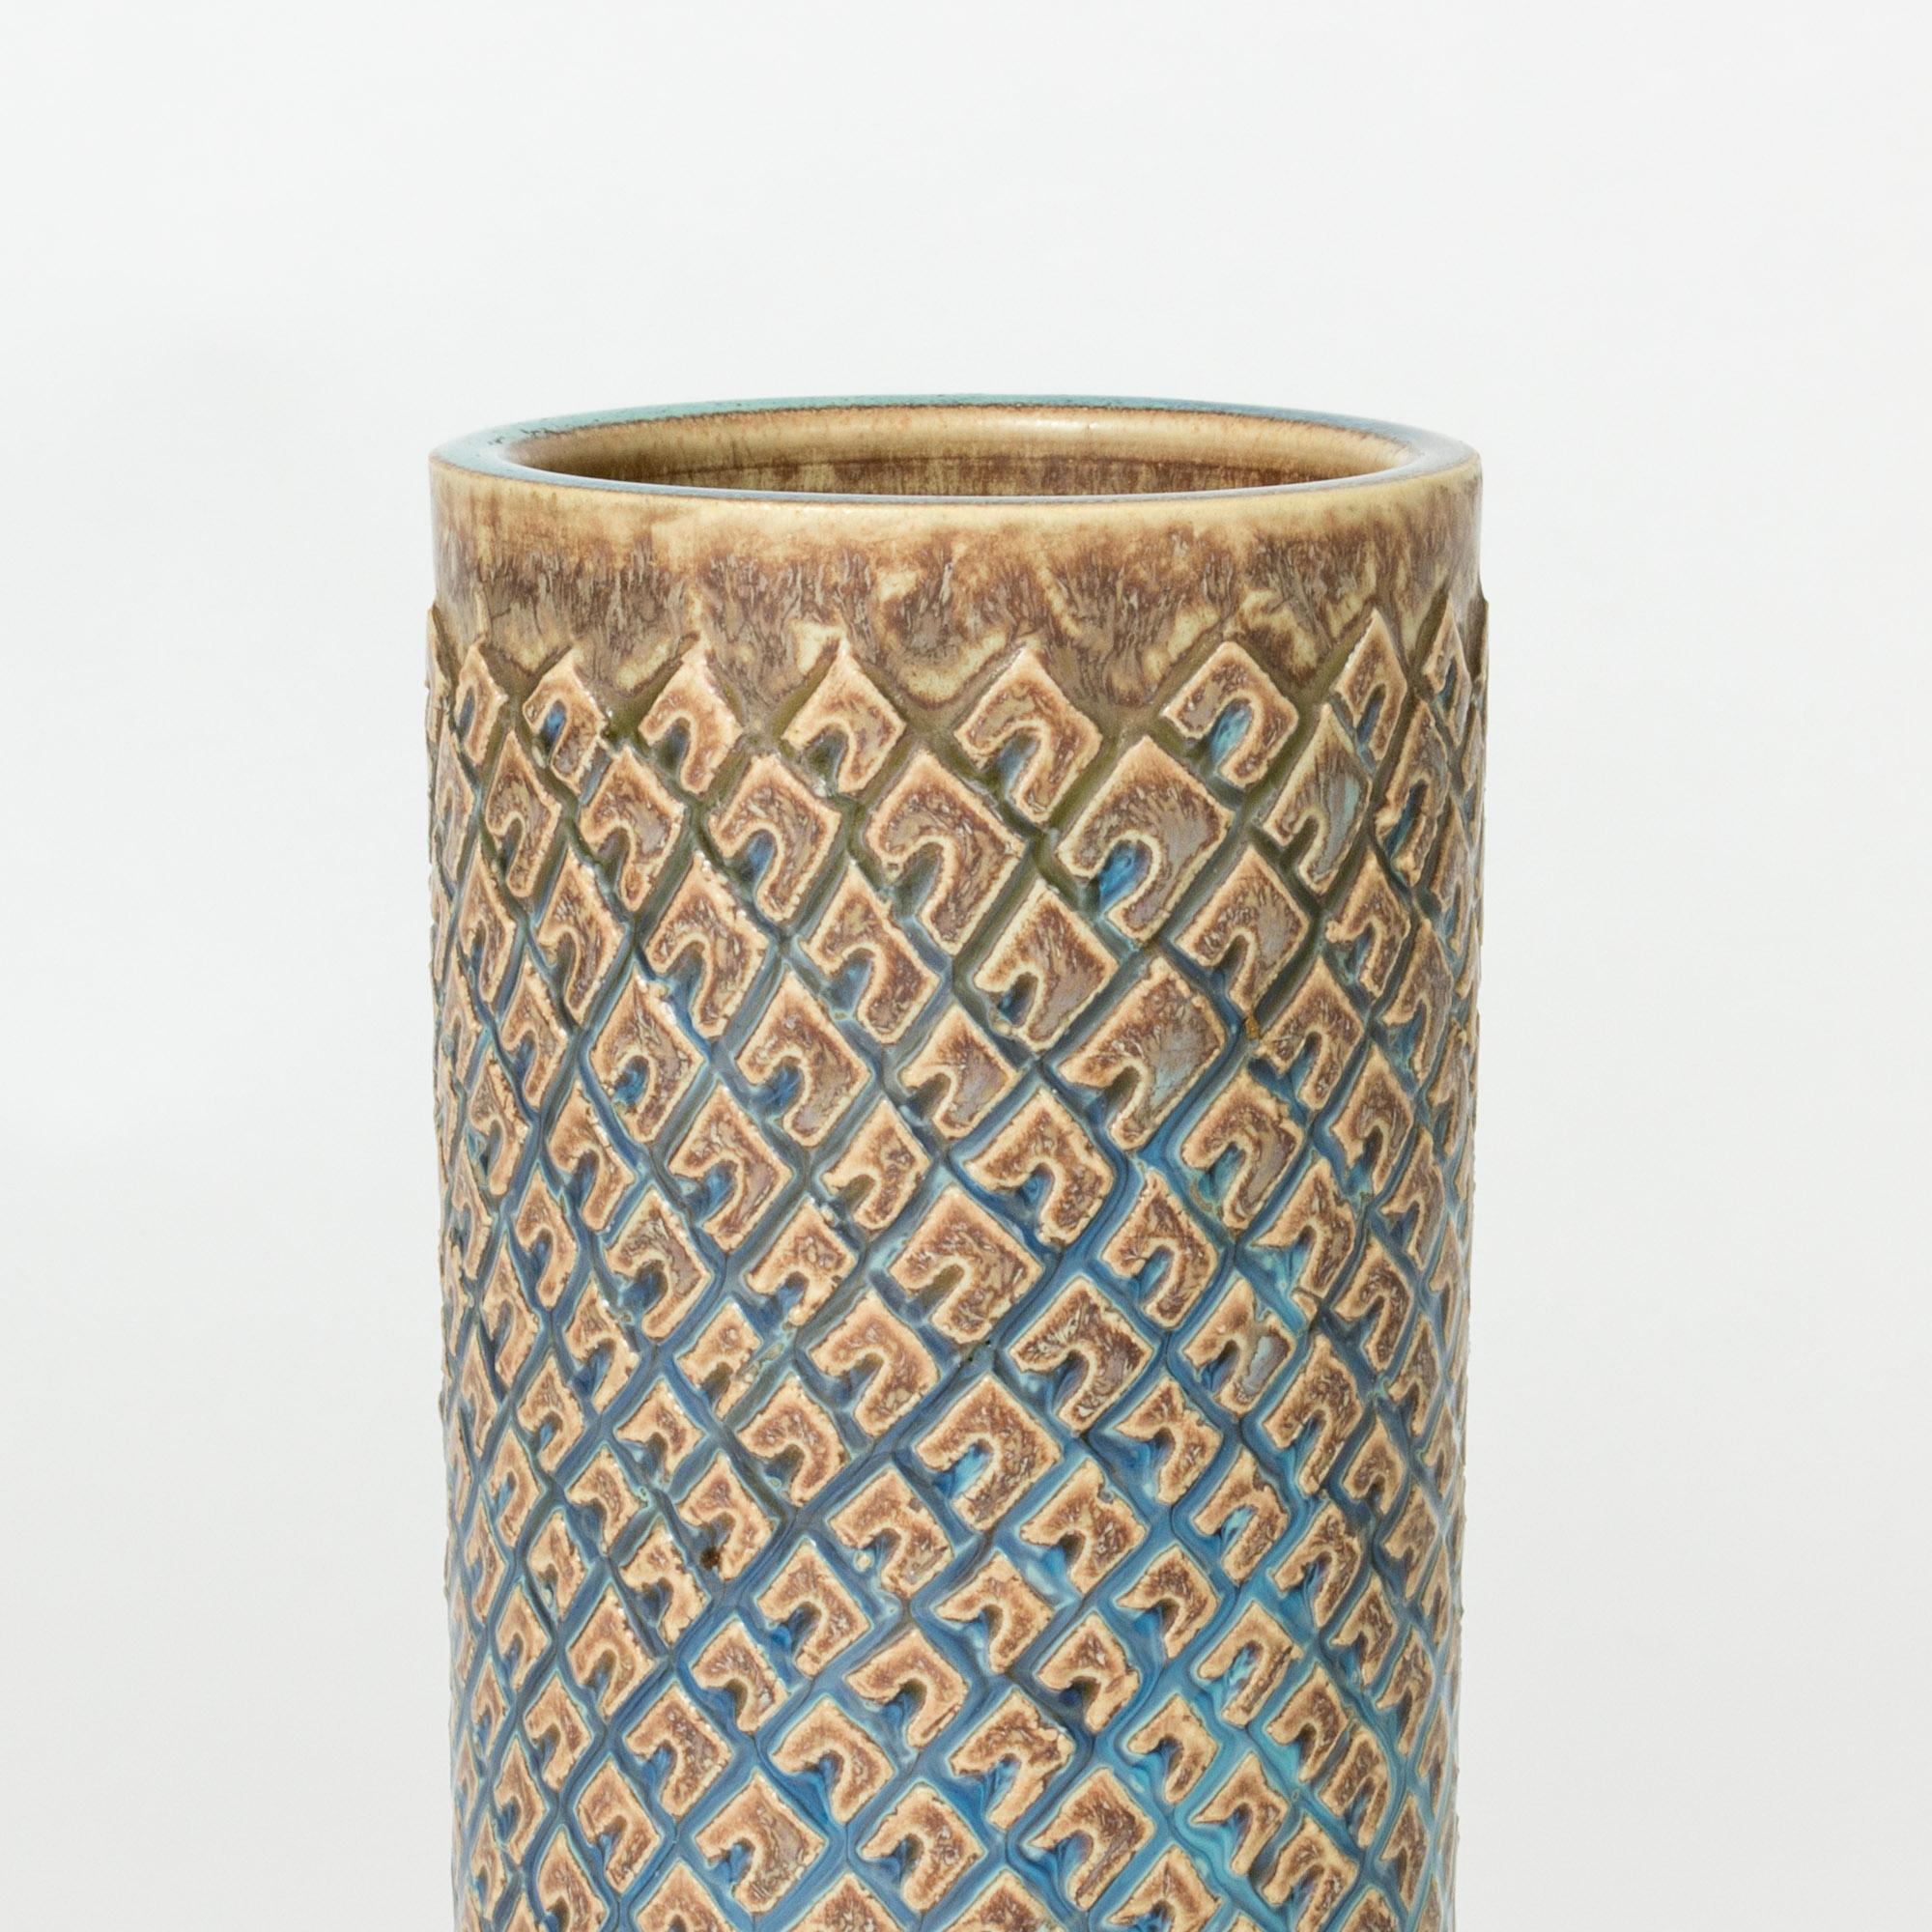 Striking stoneware vase by Stig Lindberg, in a cylinder form. Graphic pattern with blue and sand colored glaze.